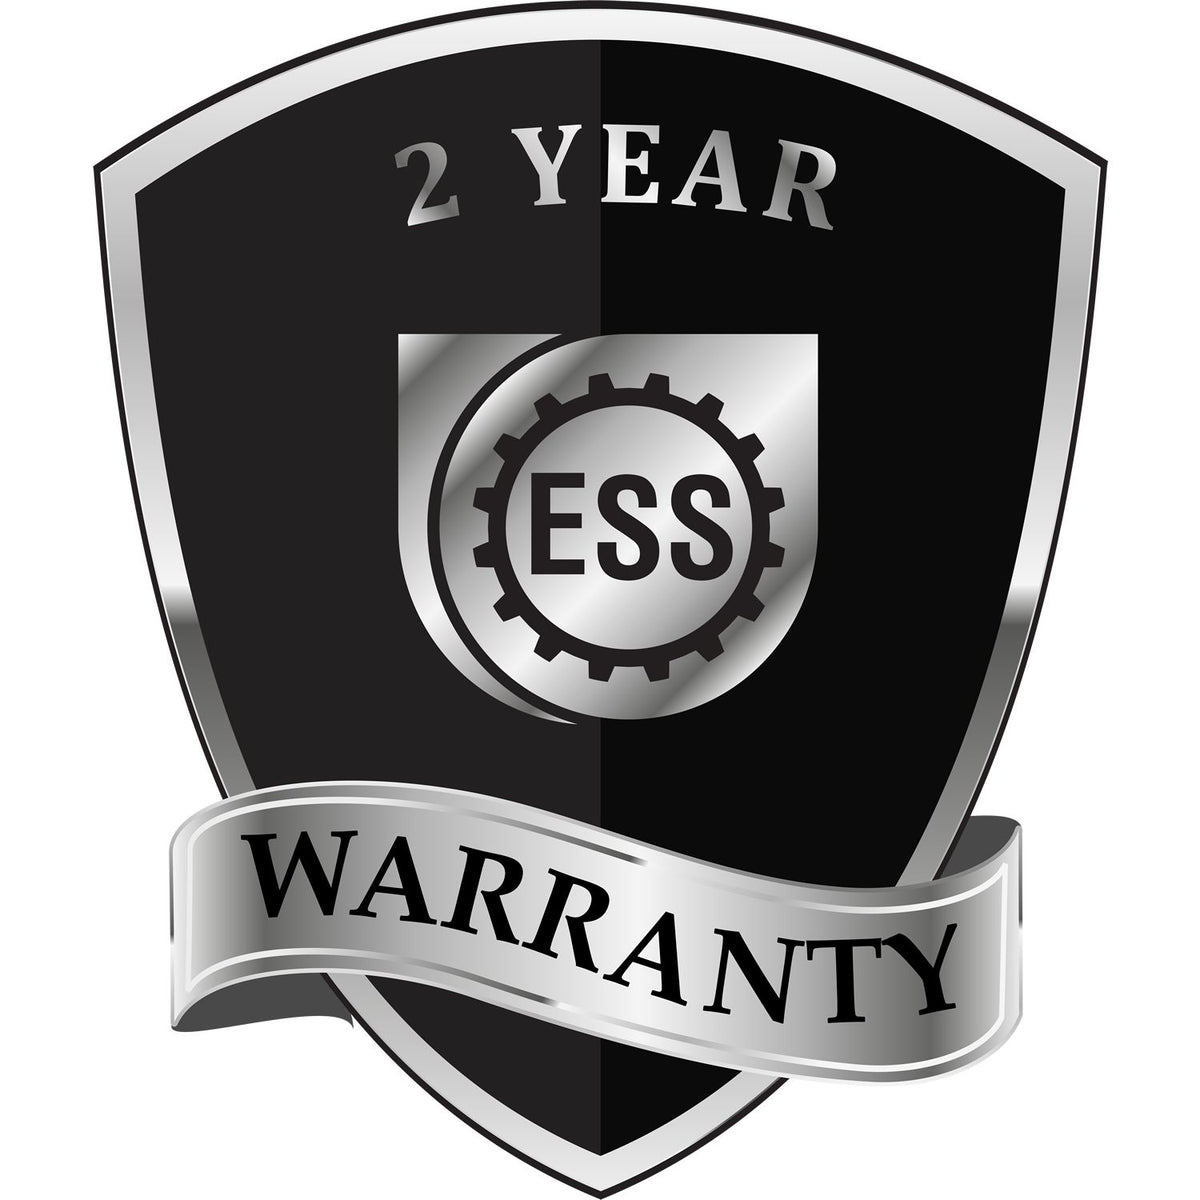 A black and silver badge or emblem showing warranty information for the Handheld Oklahoma Professional Geologist Embosser